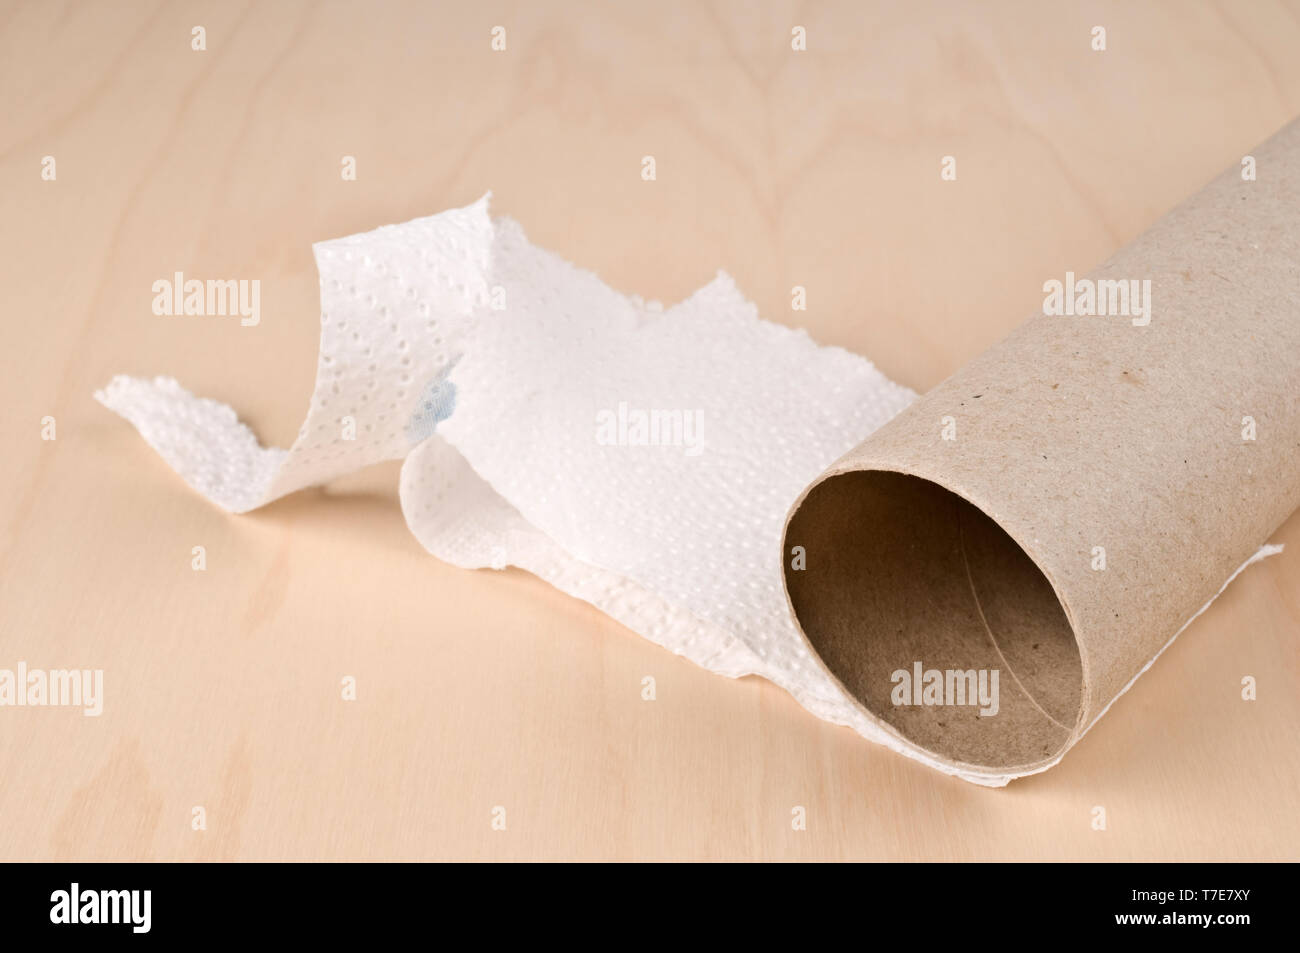 Empty paper towell roll on wooden table. Selective focus. Stock Photo